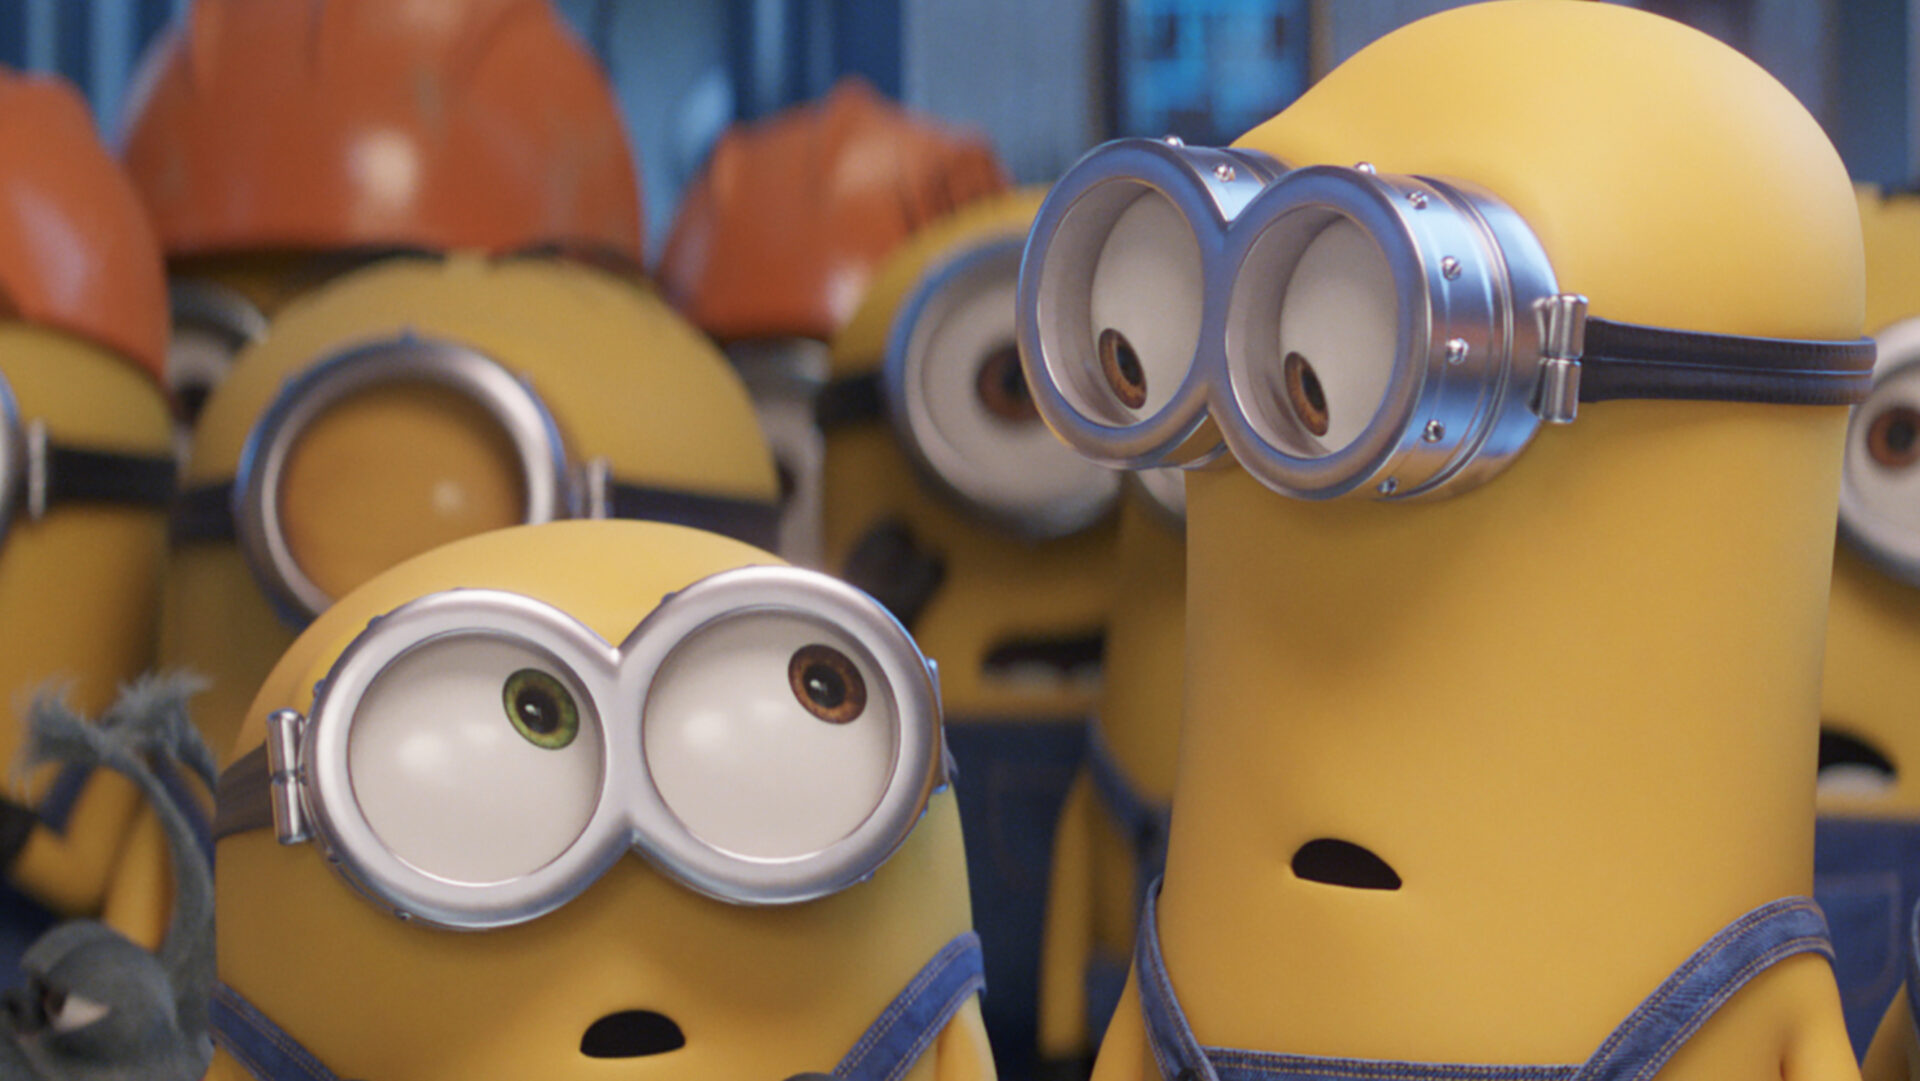 Breaking Down Every Major Song We Heard In Minions: The Rise Of Gru